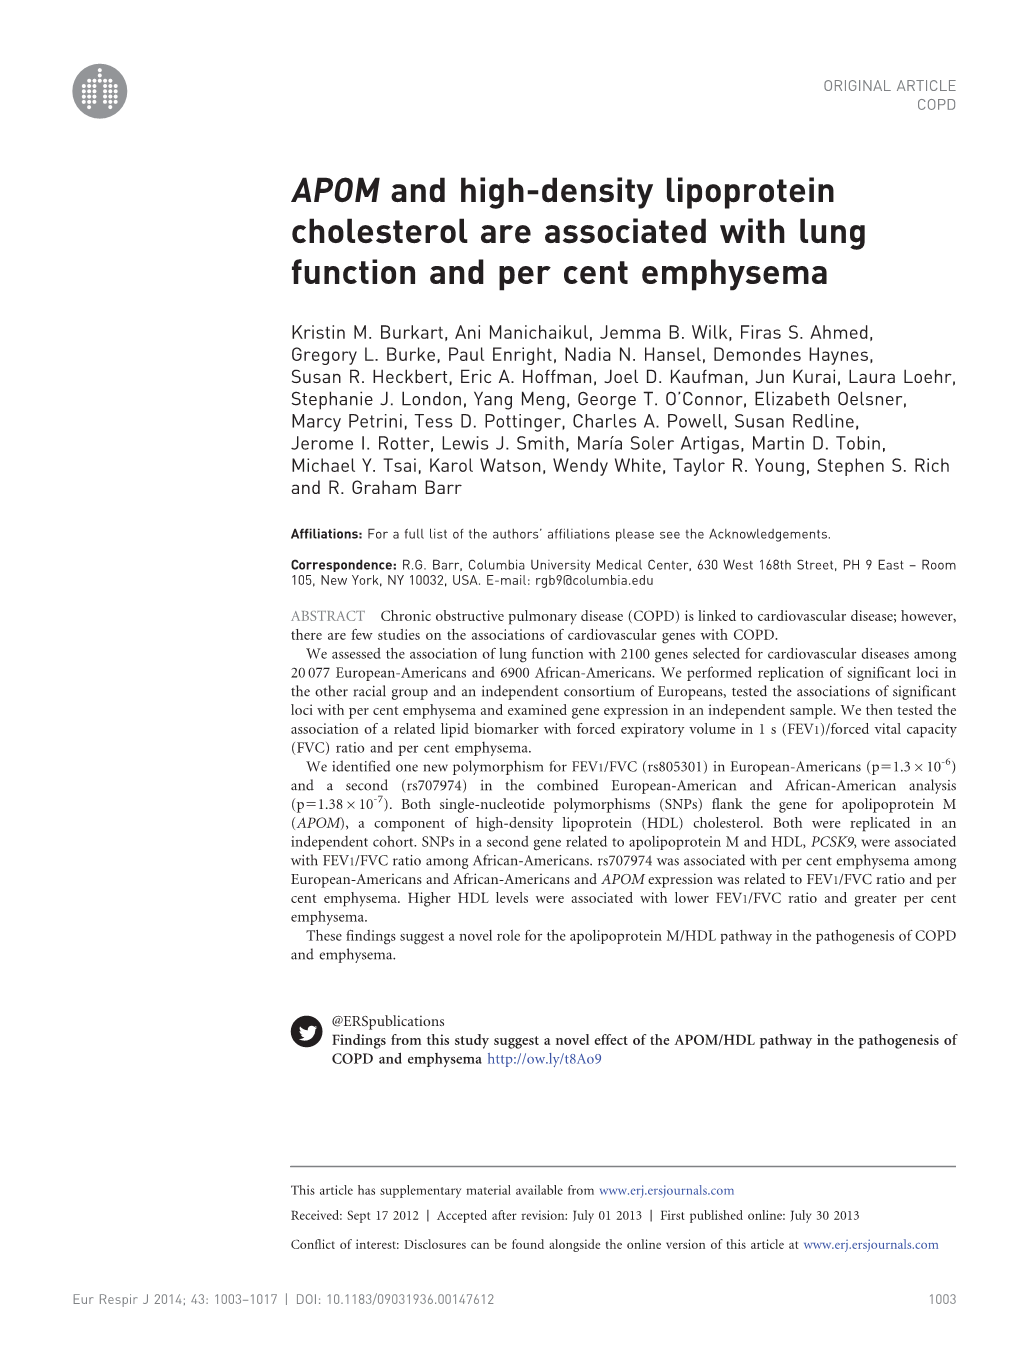 APOM and High-Density Lipoprotein Cholesterol Are Associated with Lung Function and Per Cent Emphysema